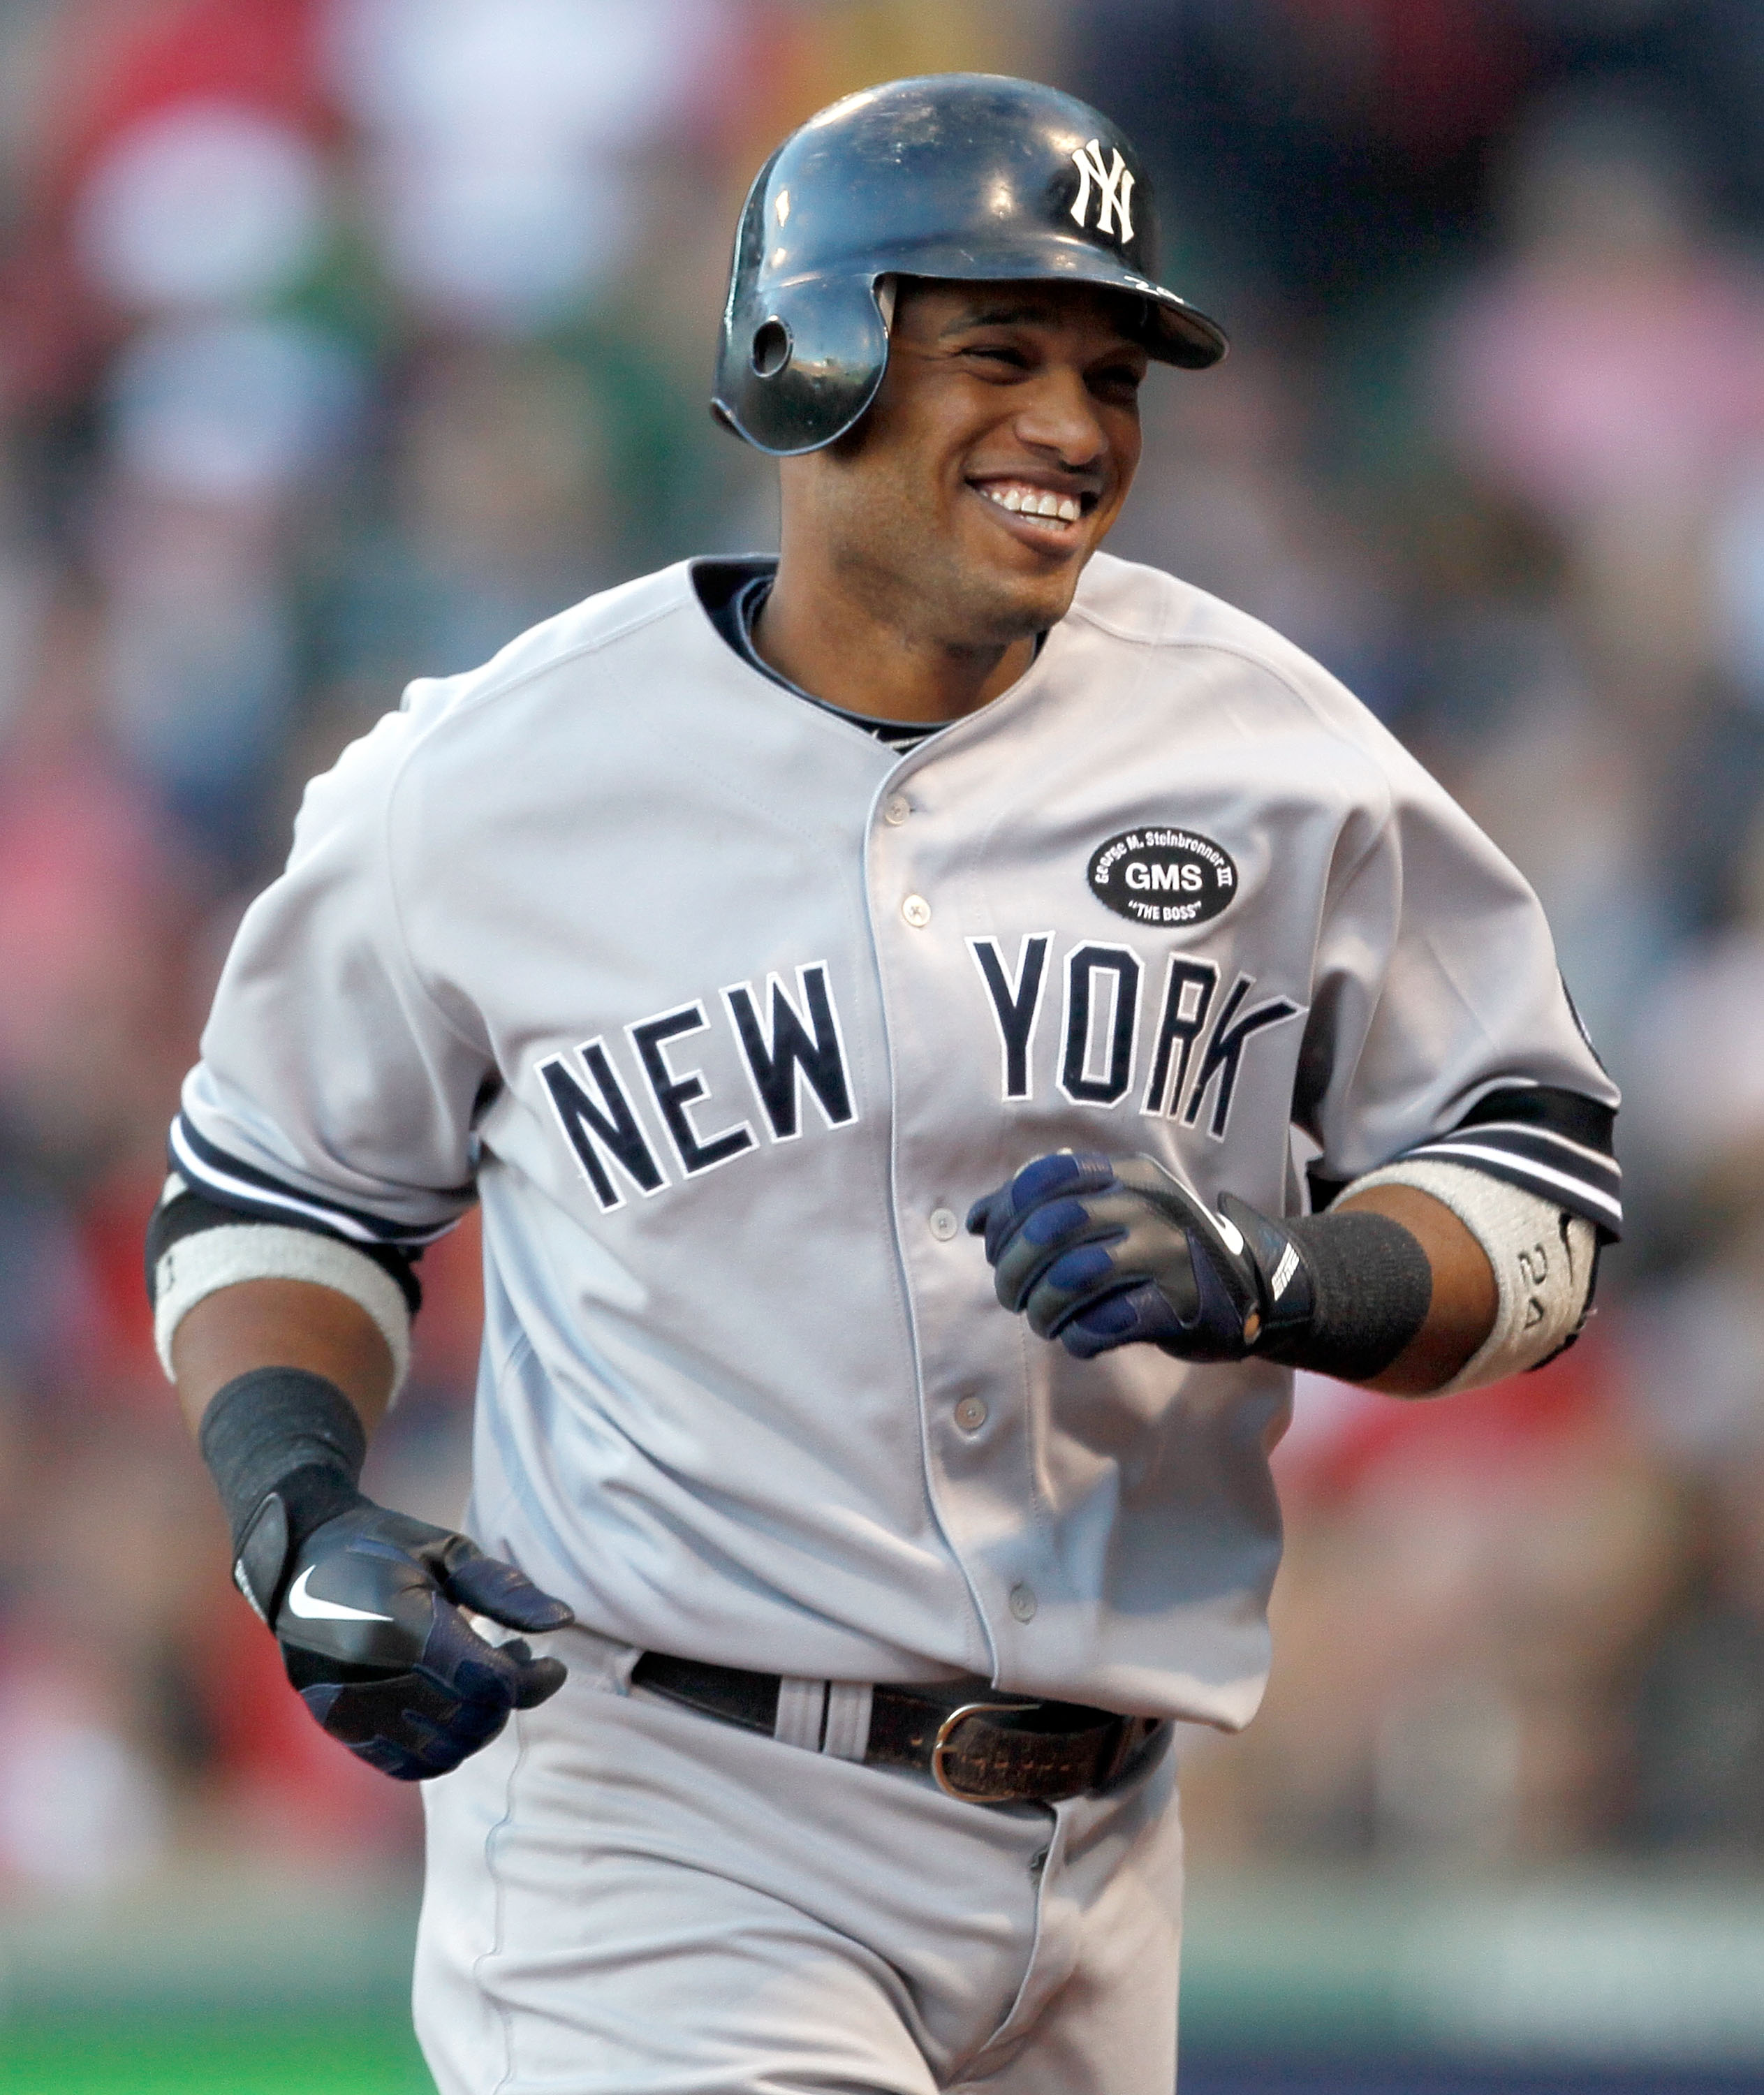 BOSTON - OCTOBER 2:  Robinson Cano #24 of the New York Yankees smiles after hitting a solo home run in the third inning during the first game of a doubleheader against the Boston Red Sox at Fenway Park October 2, 2010 in Boston, Massachusetts. (Photo by J